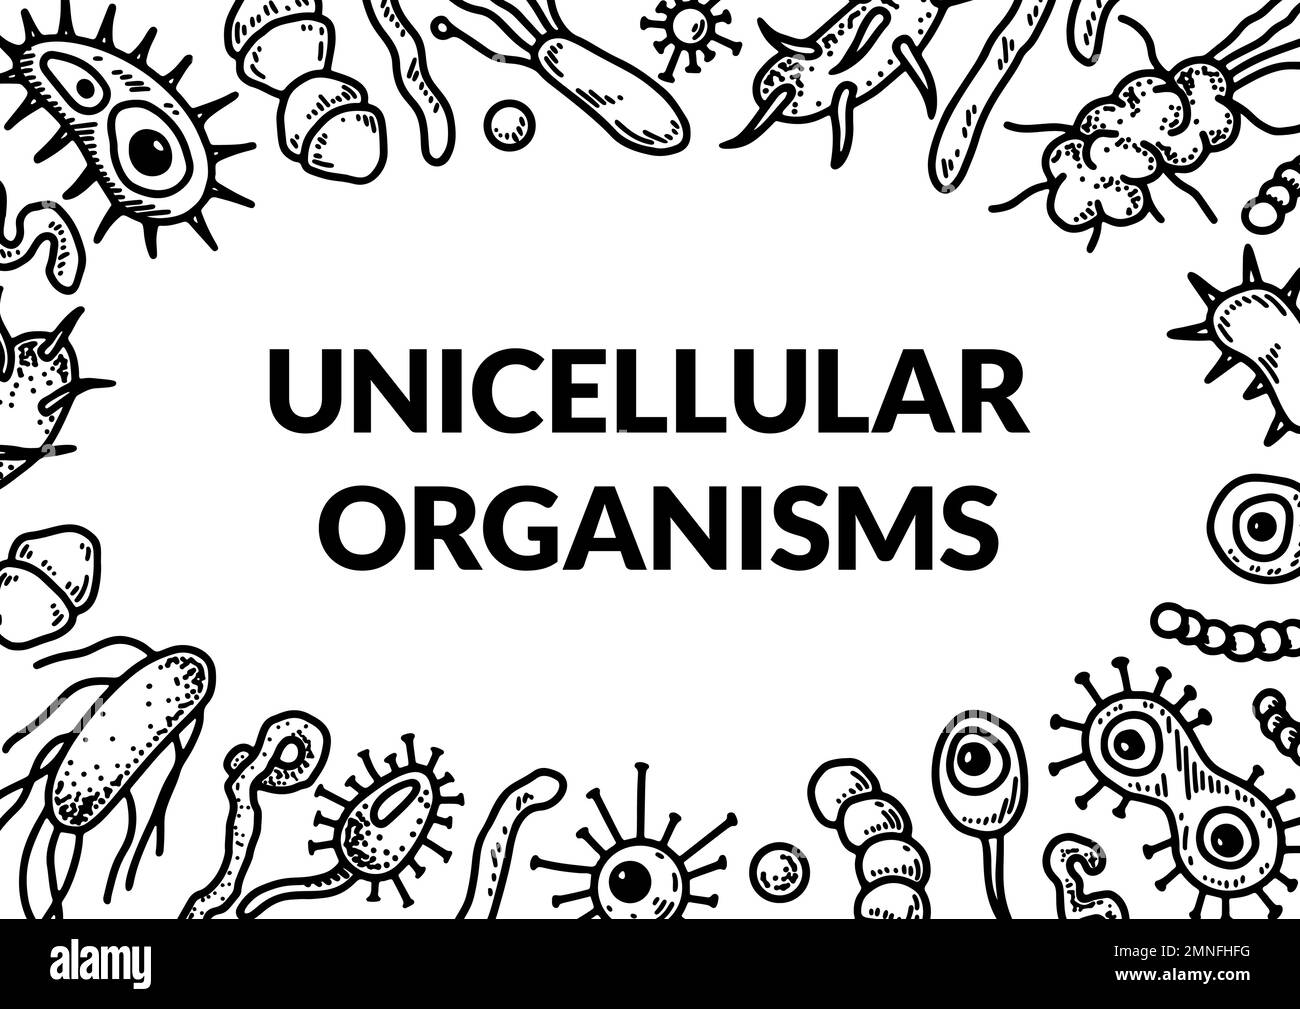 Microscopic unicellular organisms design. Scientific biology vector illustration in sketch style Stock Vector